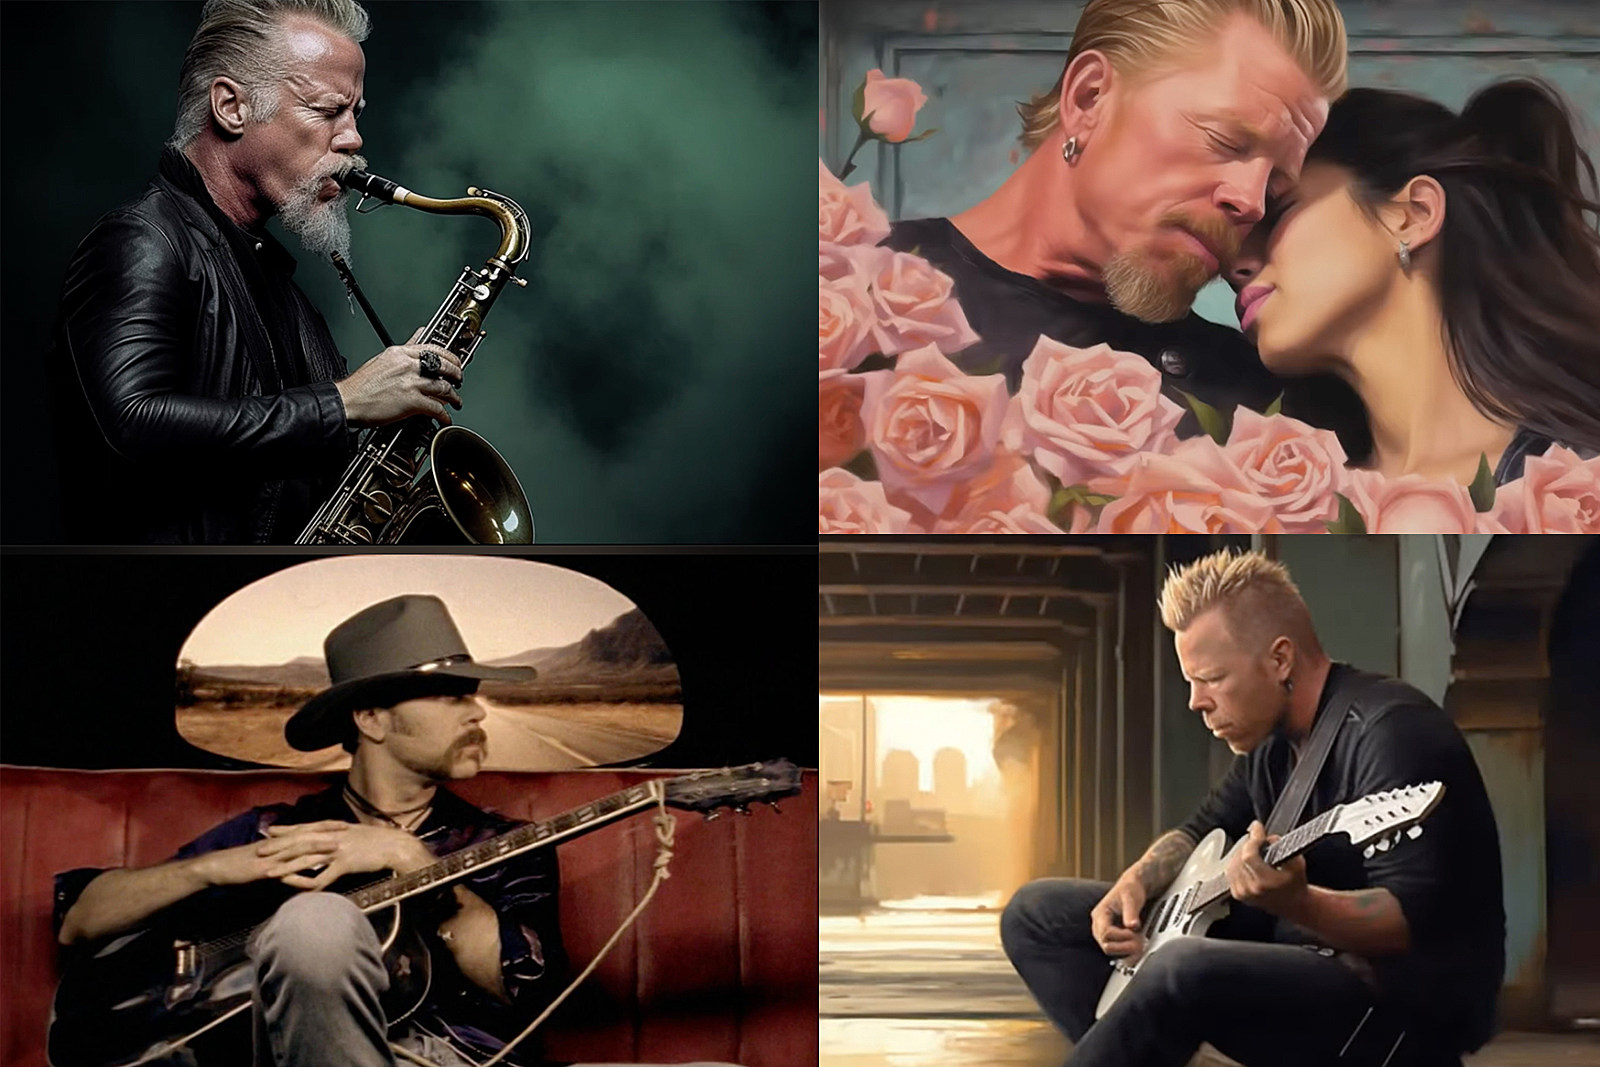 Hear 25 AI ‘James Hetfield’ Covers: Toto, Wham!, Seal and More